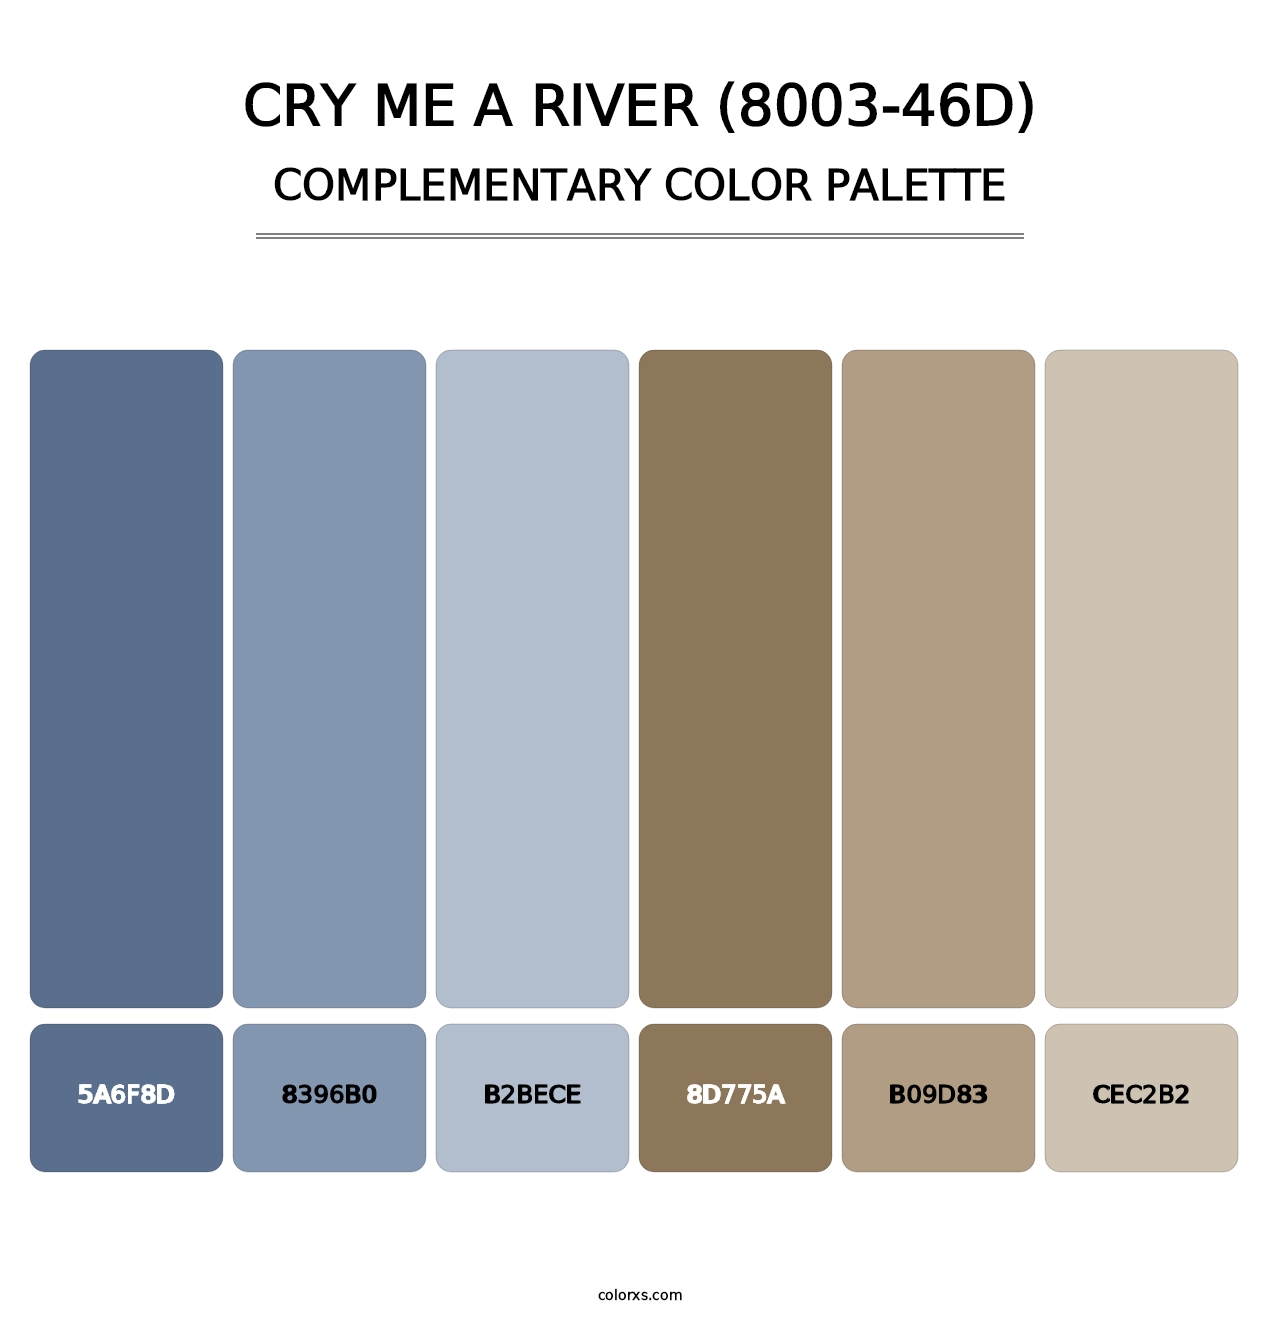 Cry Me a River (8003-46D) - Complementary Color Palette